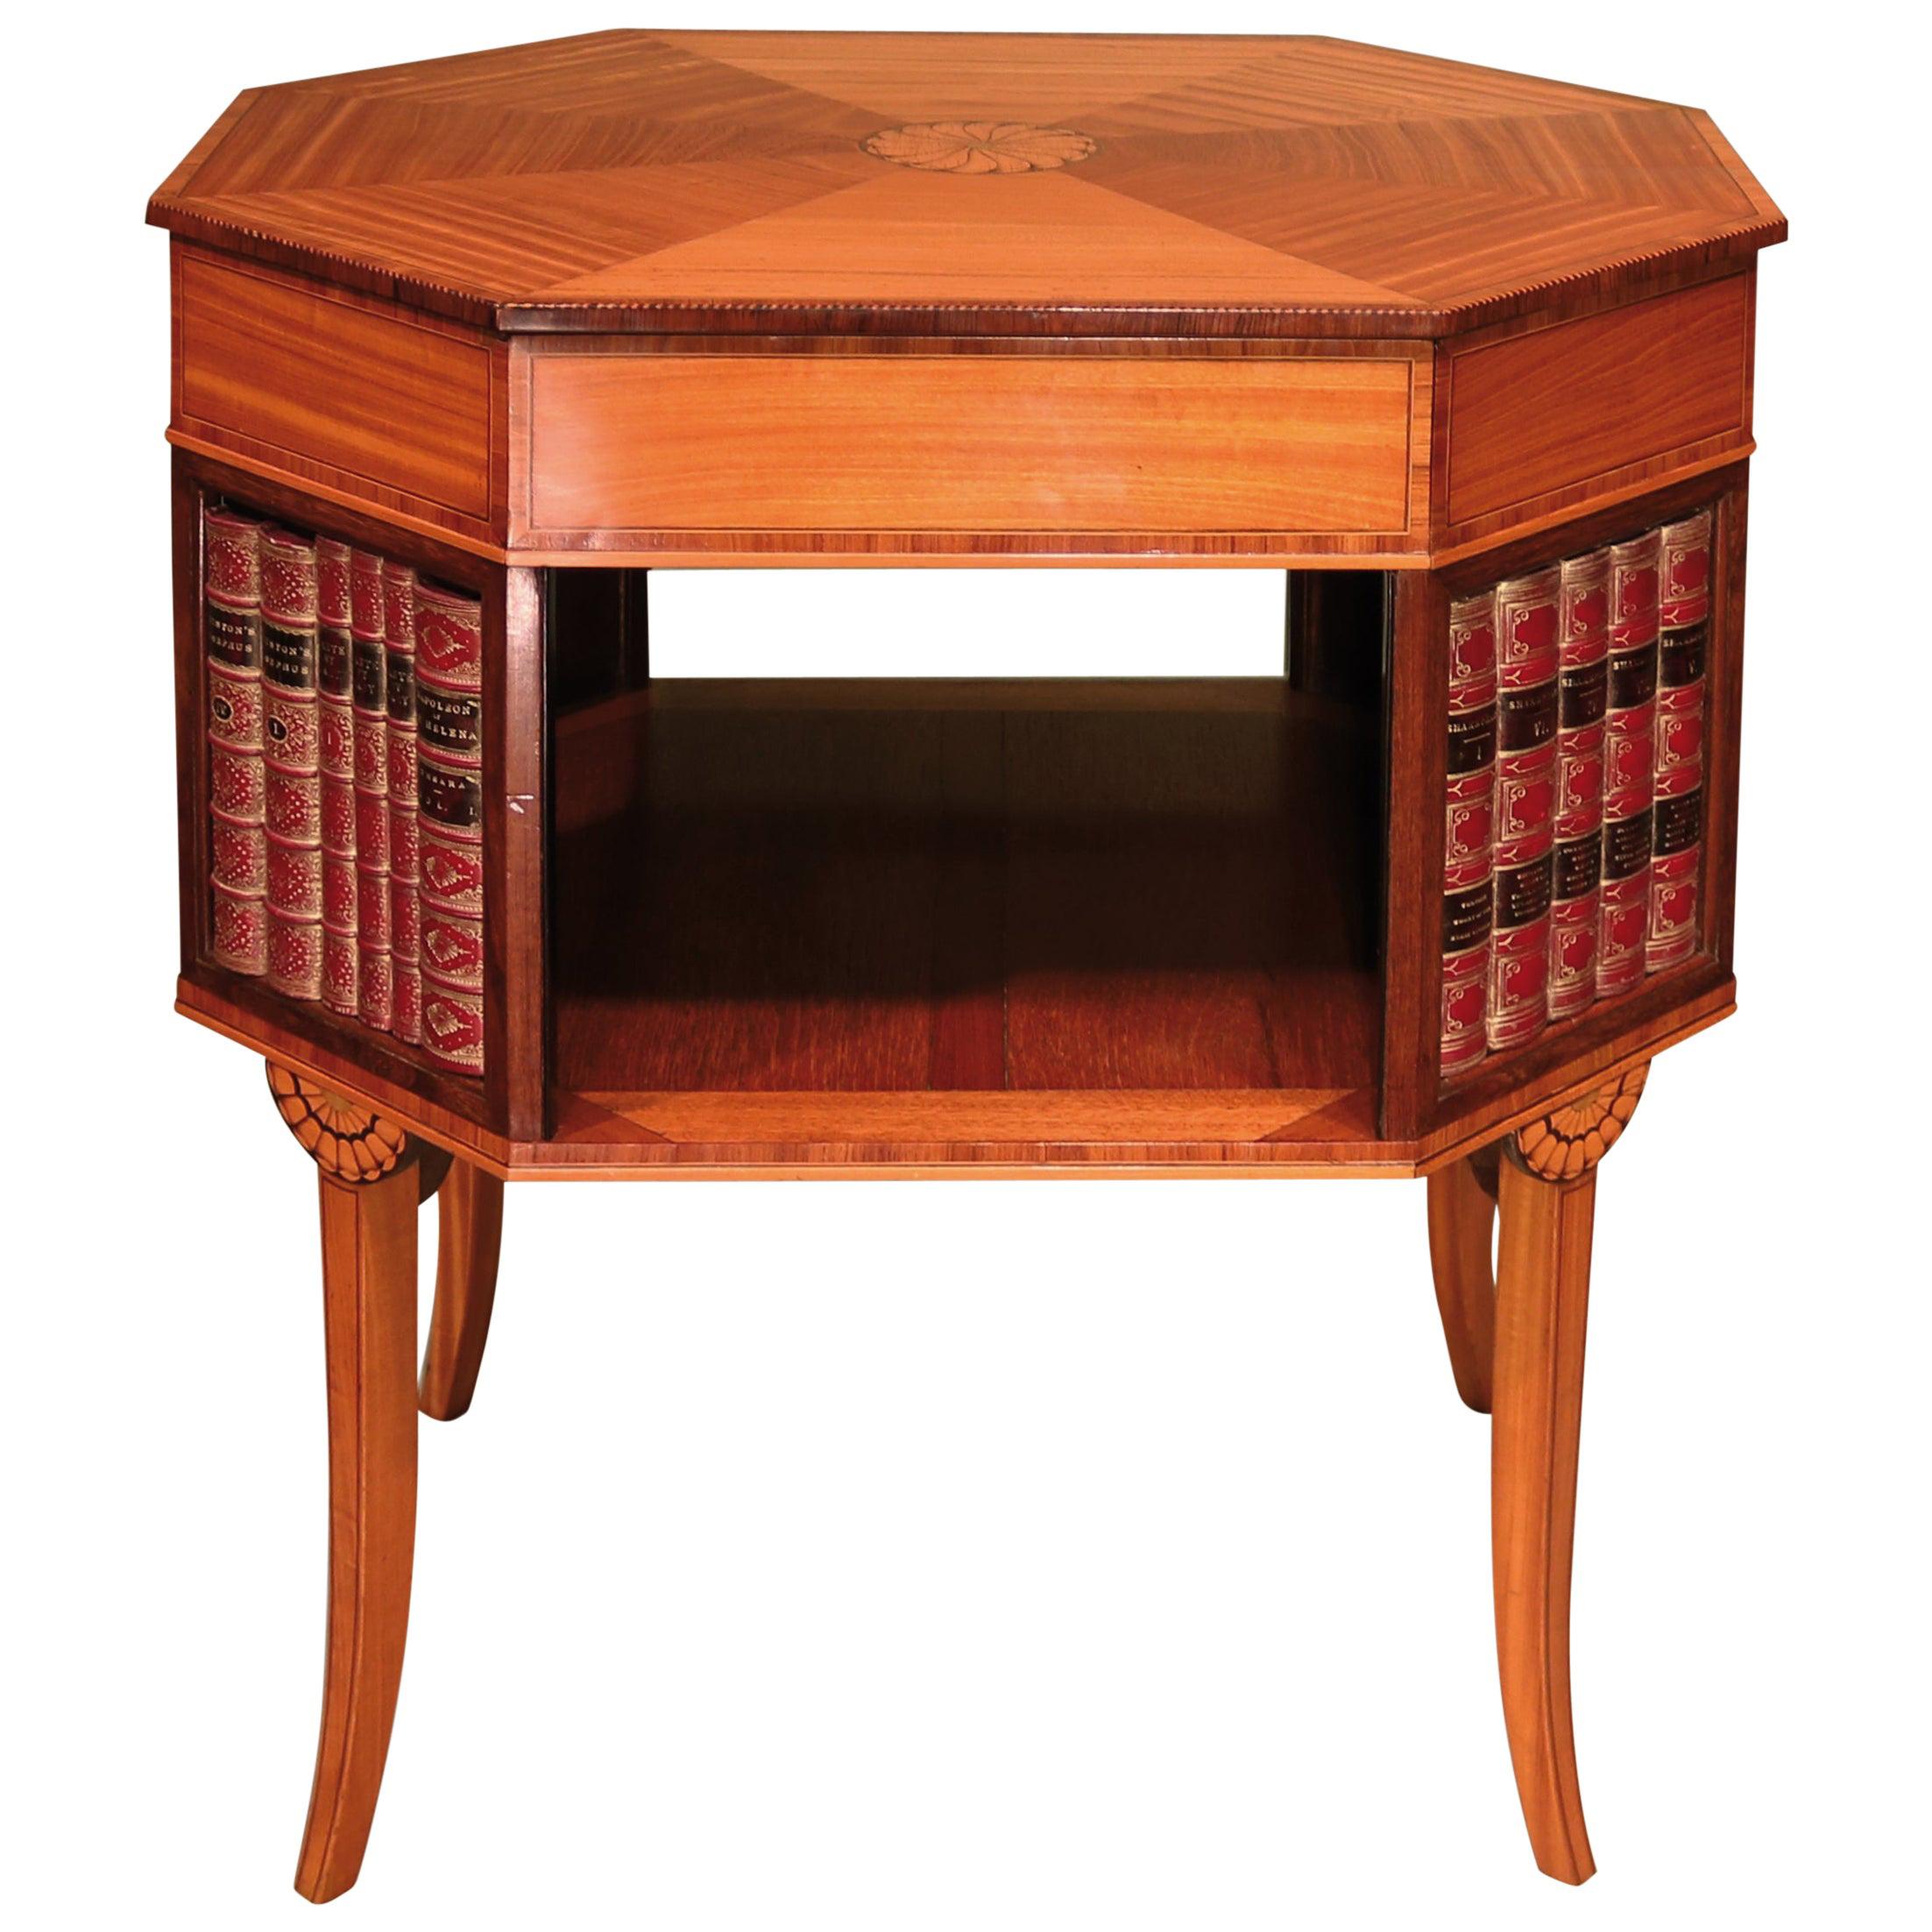 Late 18th Century Sheraton Period Satinwood Occasional Table